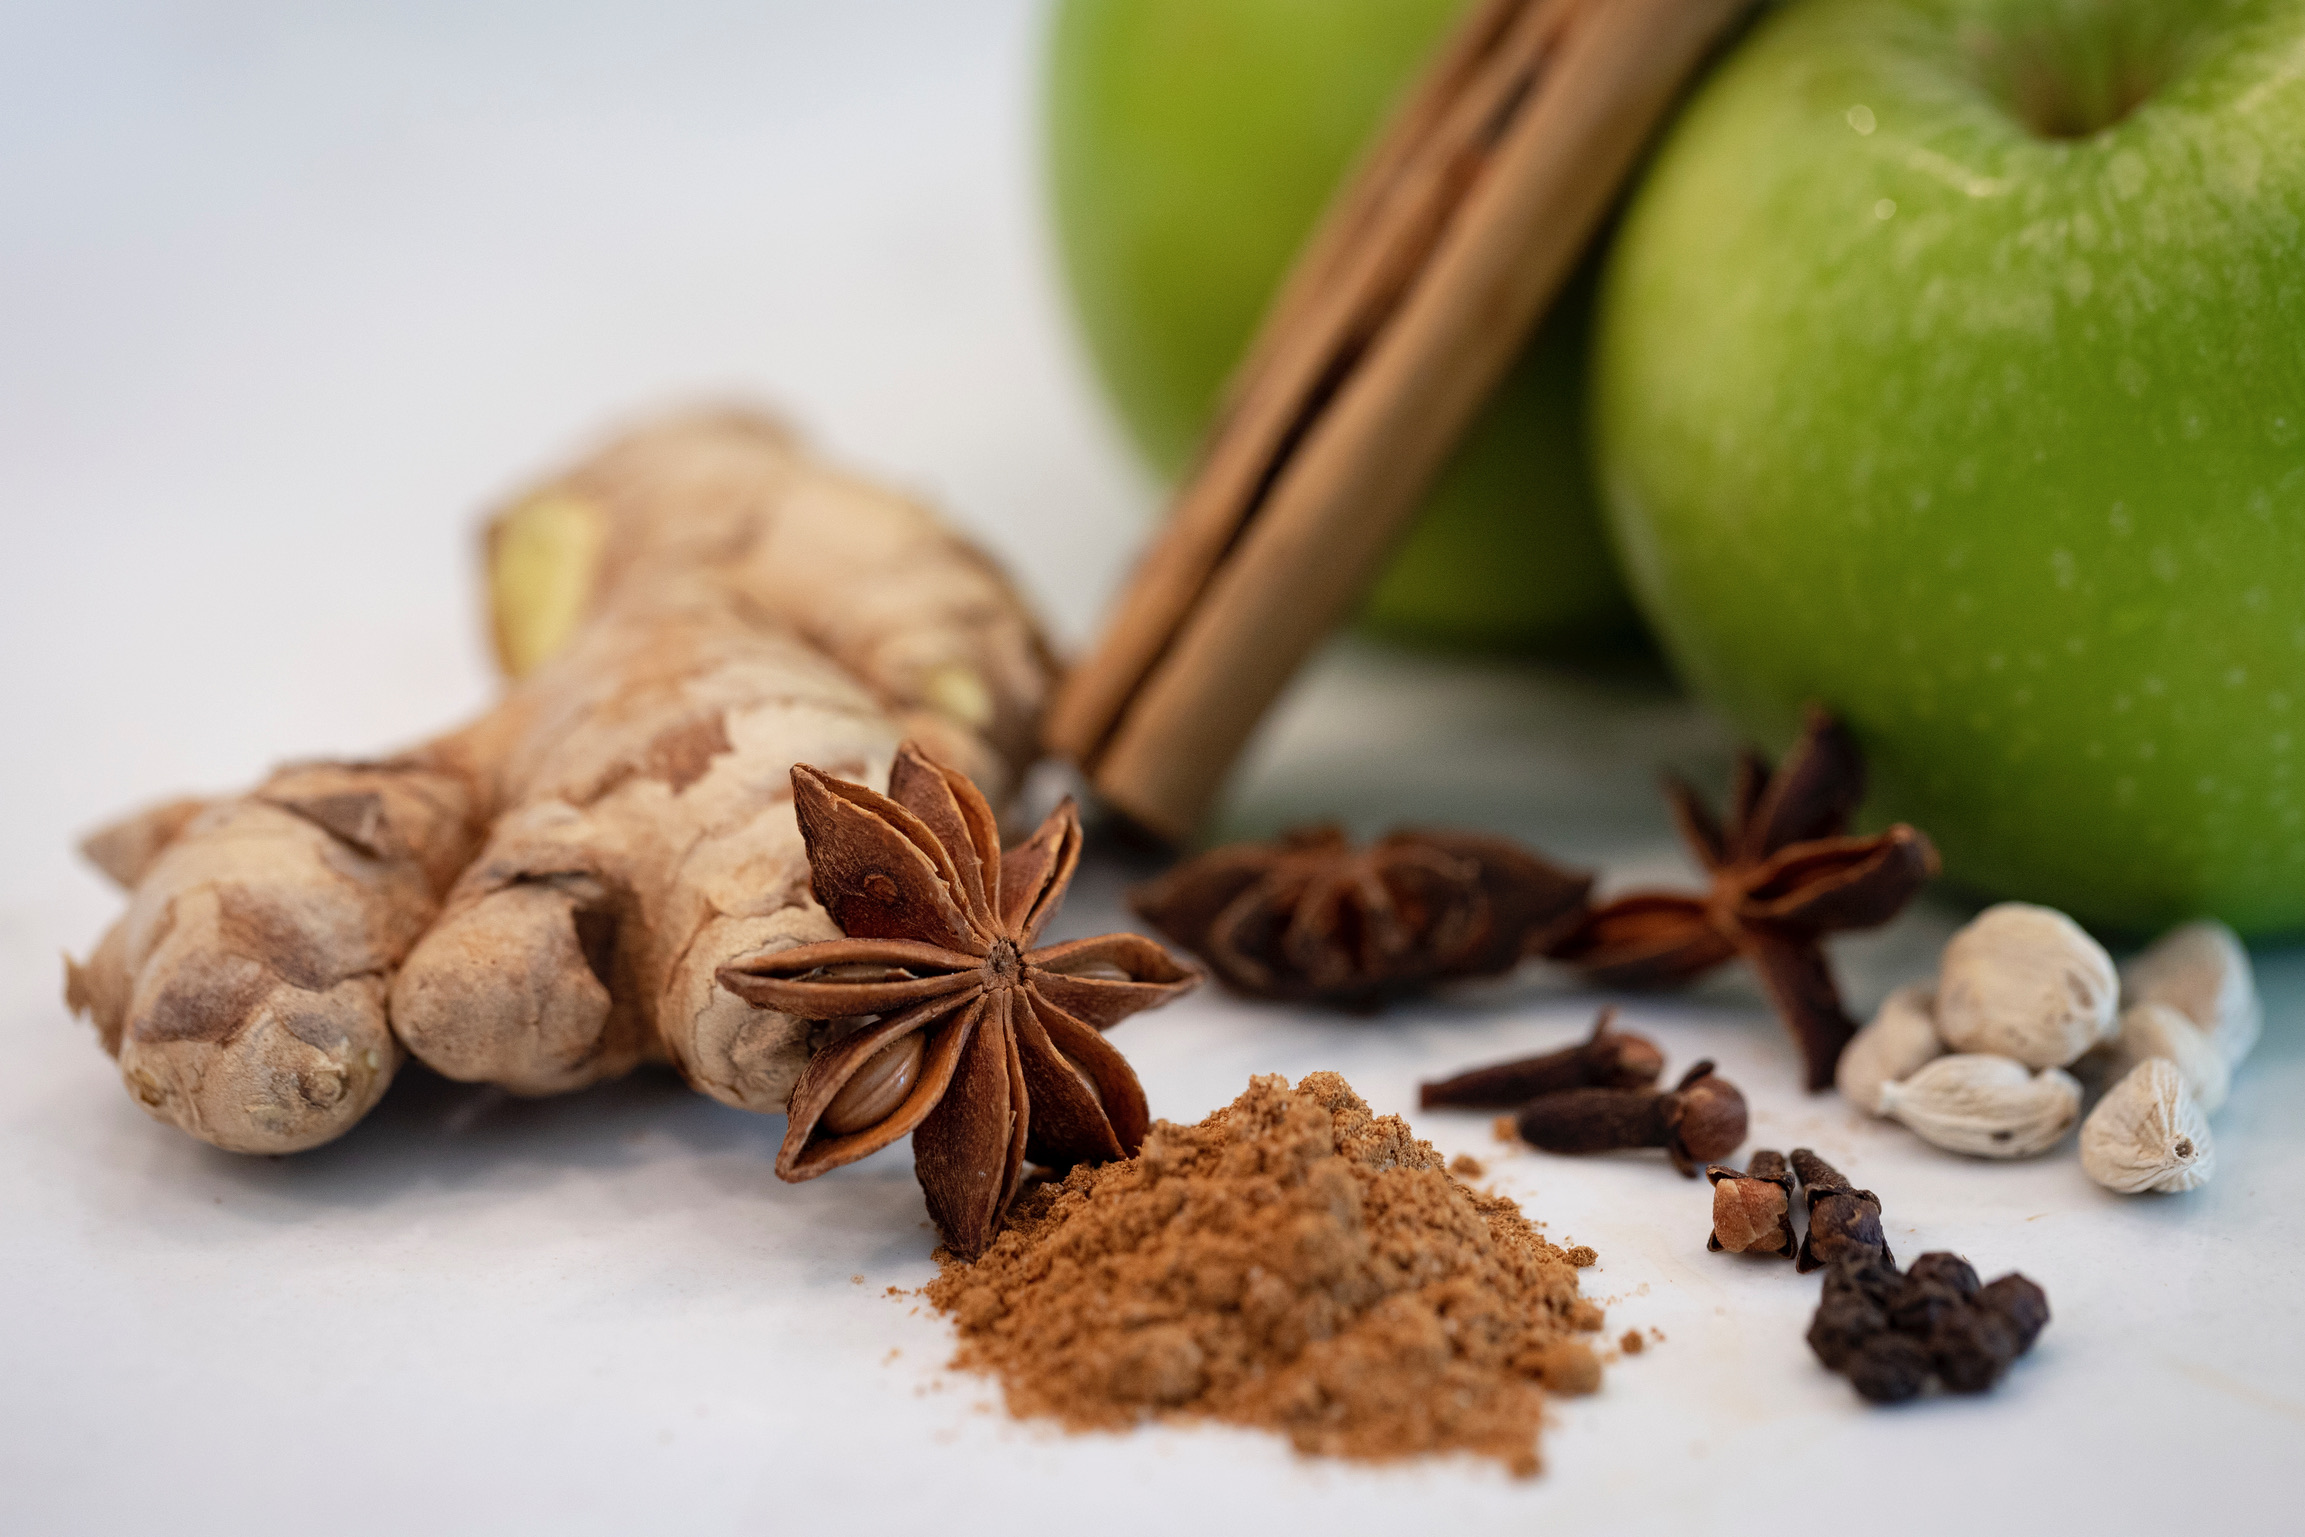 The spices we love to use in our spiced juices and mulled cider: cinnamon, cardamom, star anise, black peppercorn, and ginger, sitting next to